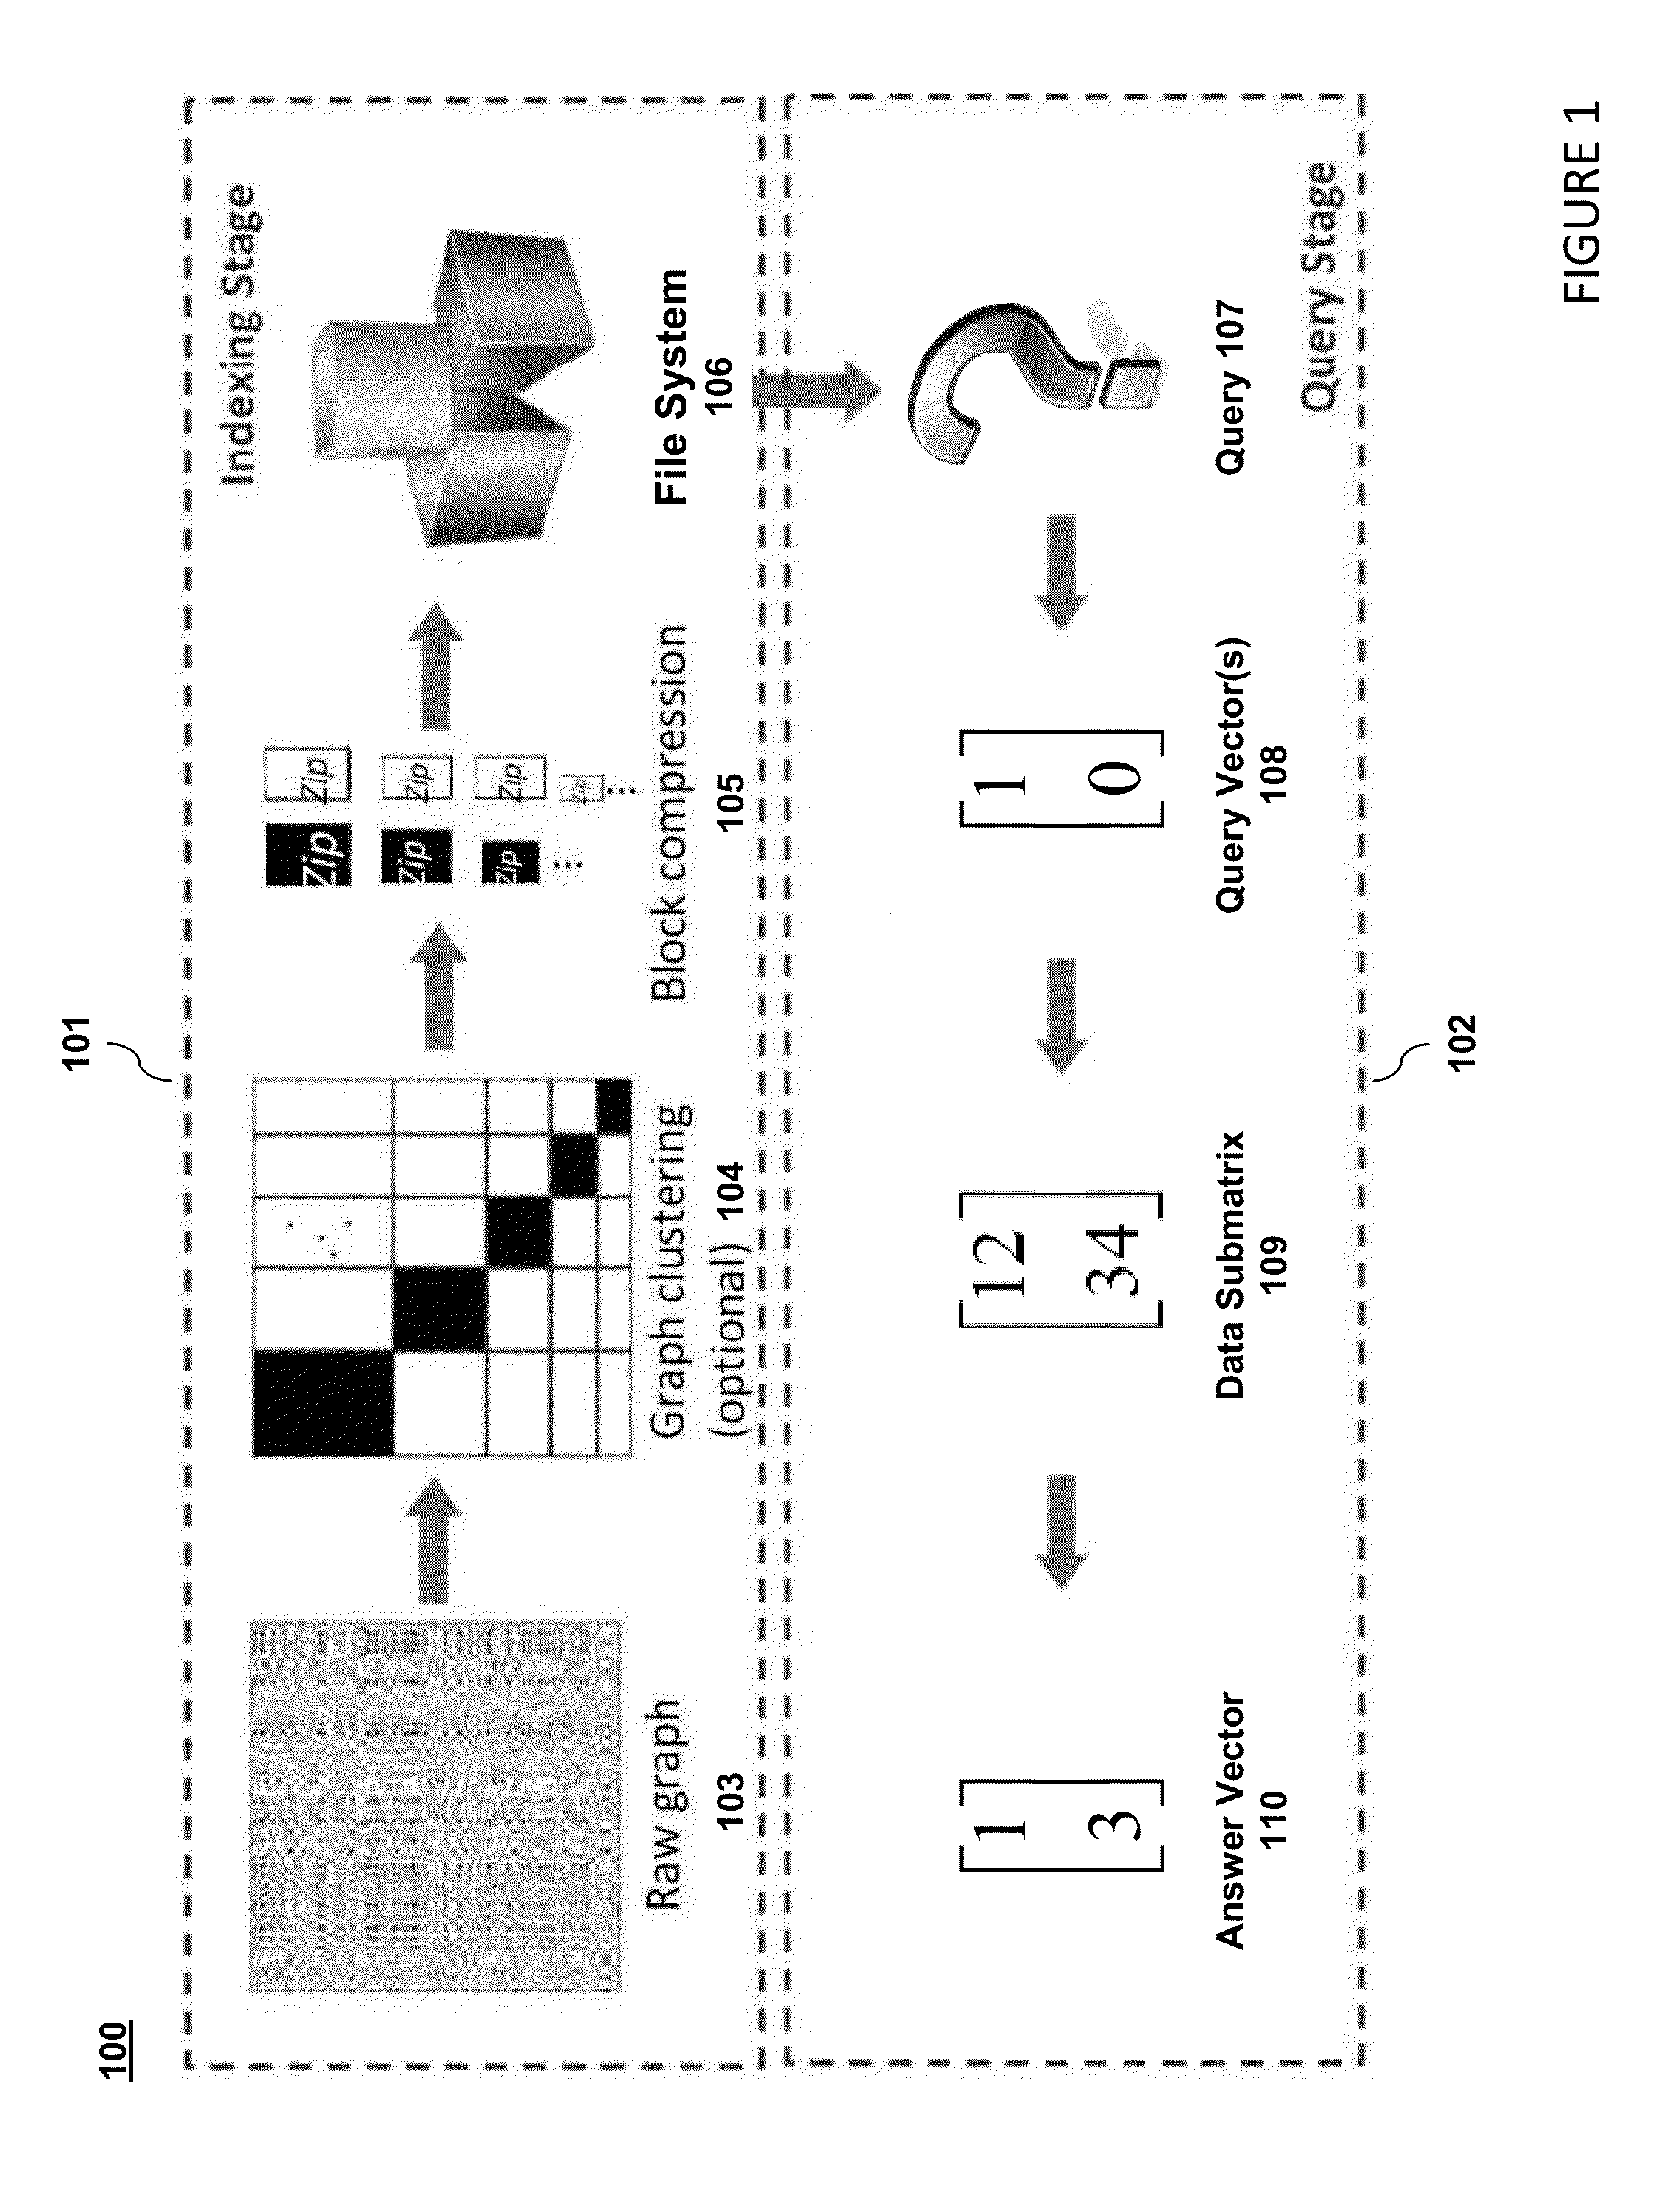 Method and system for managing and querying large graphs